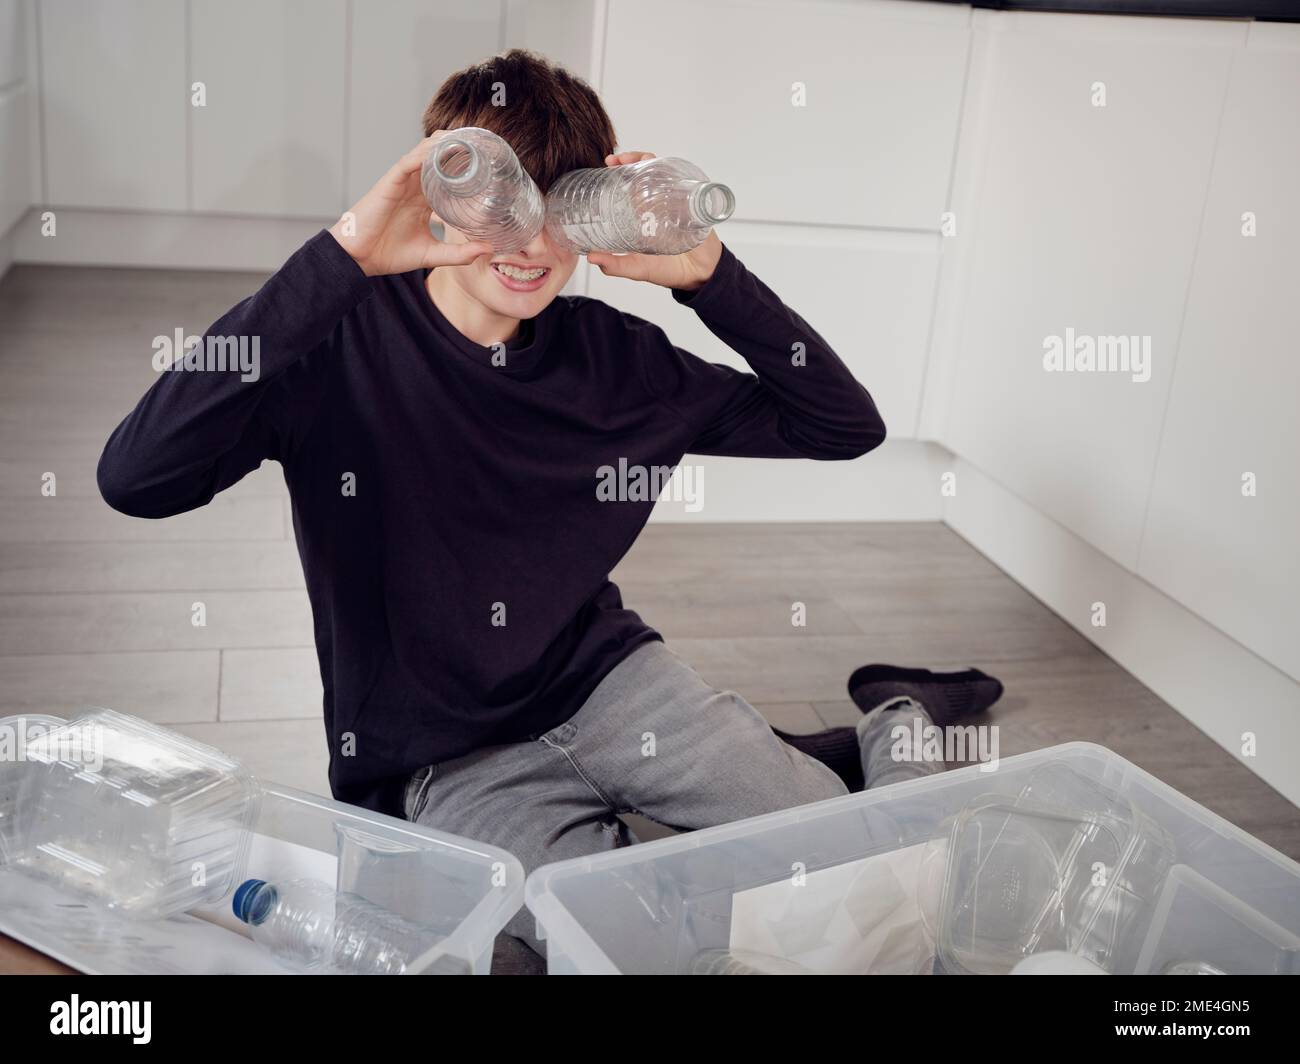 Boy separting plastic waste covering eyes with plastic bottles Stock Photo